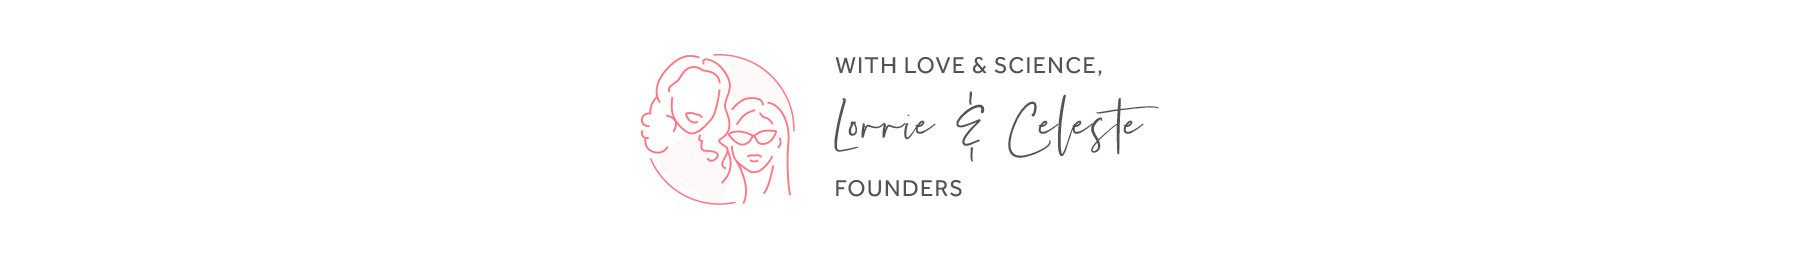 With love & science, Lorrie & Celeste Founders of Caire Beauty Skin Care for midlife women who are experiencing peri to post menopausal skin aging